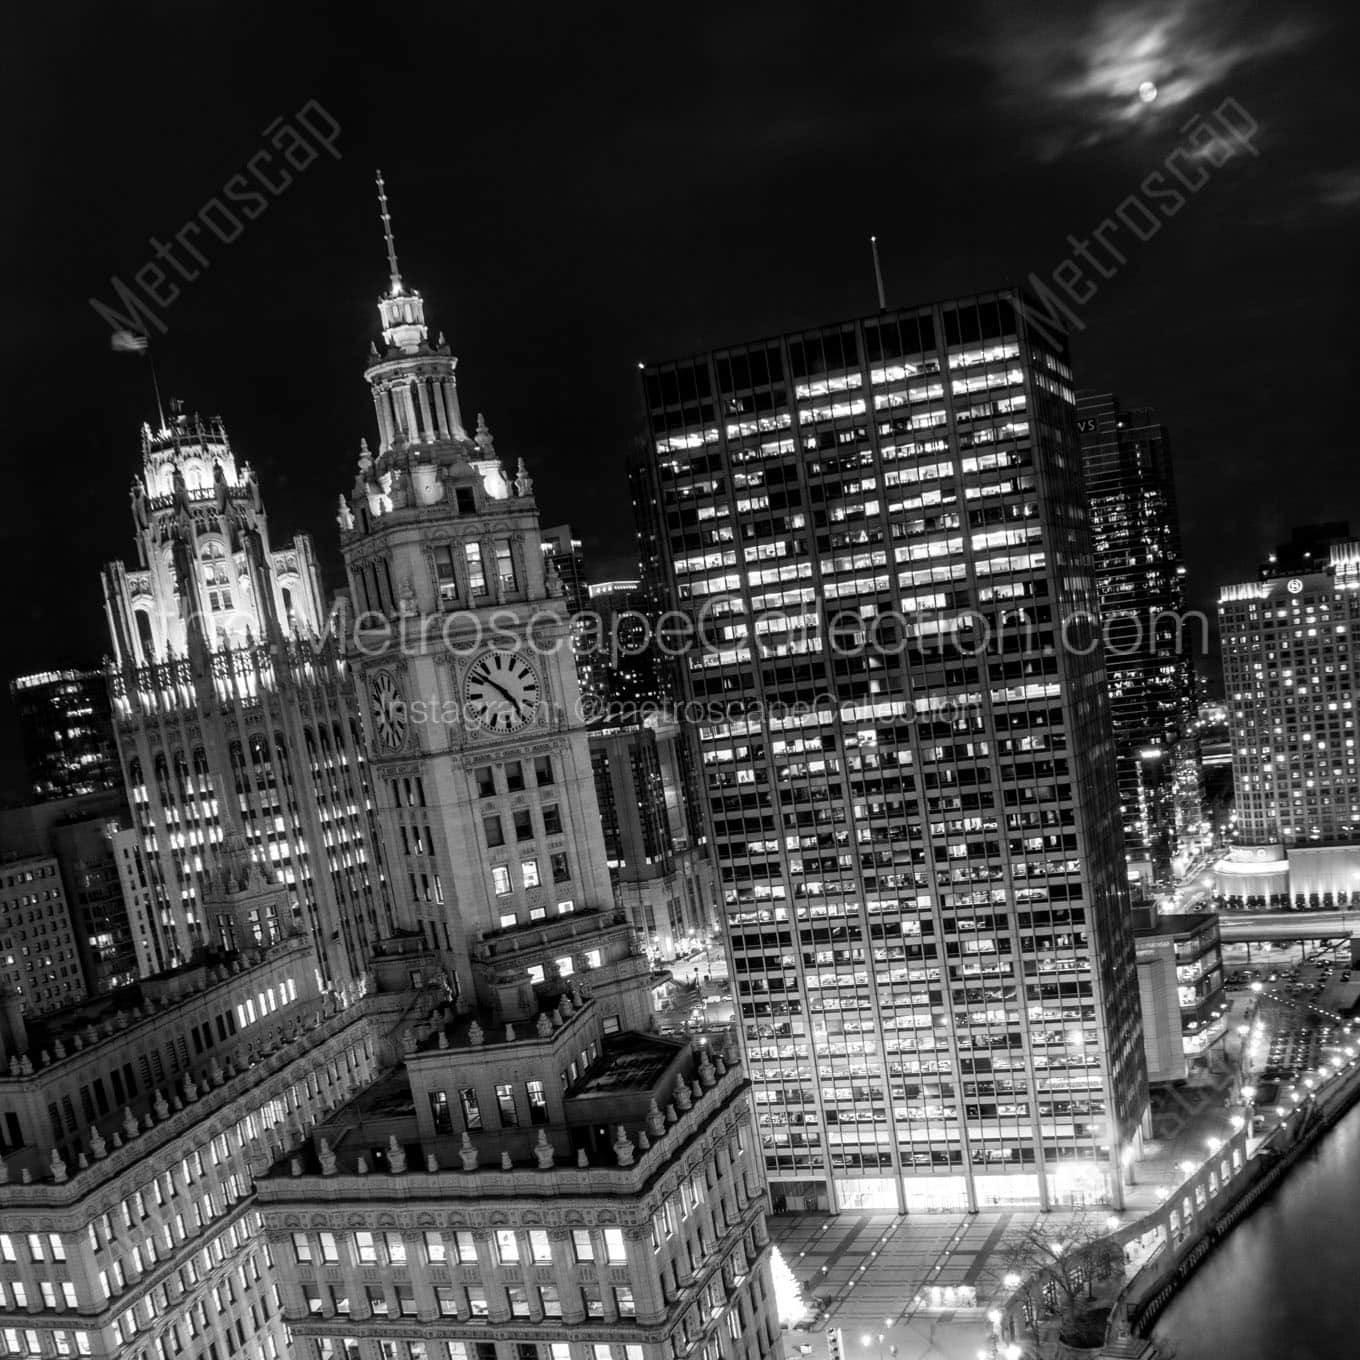 moonrise over downtown chicago at night Black & White Office Art